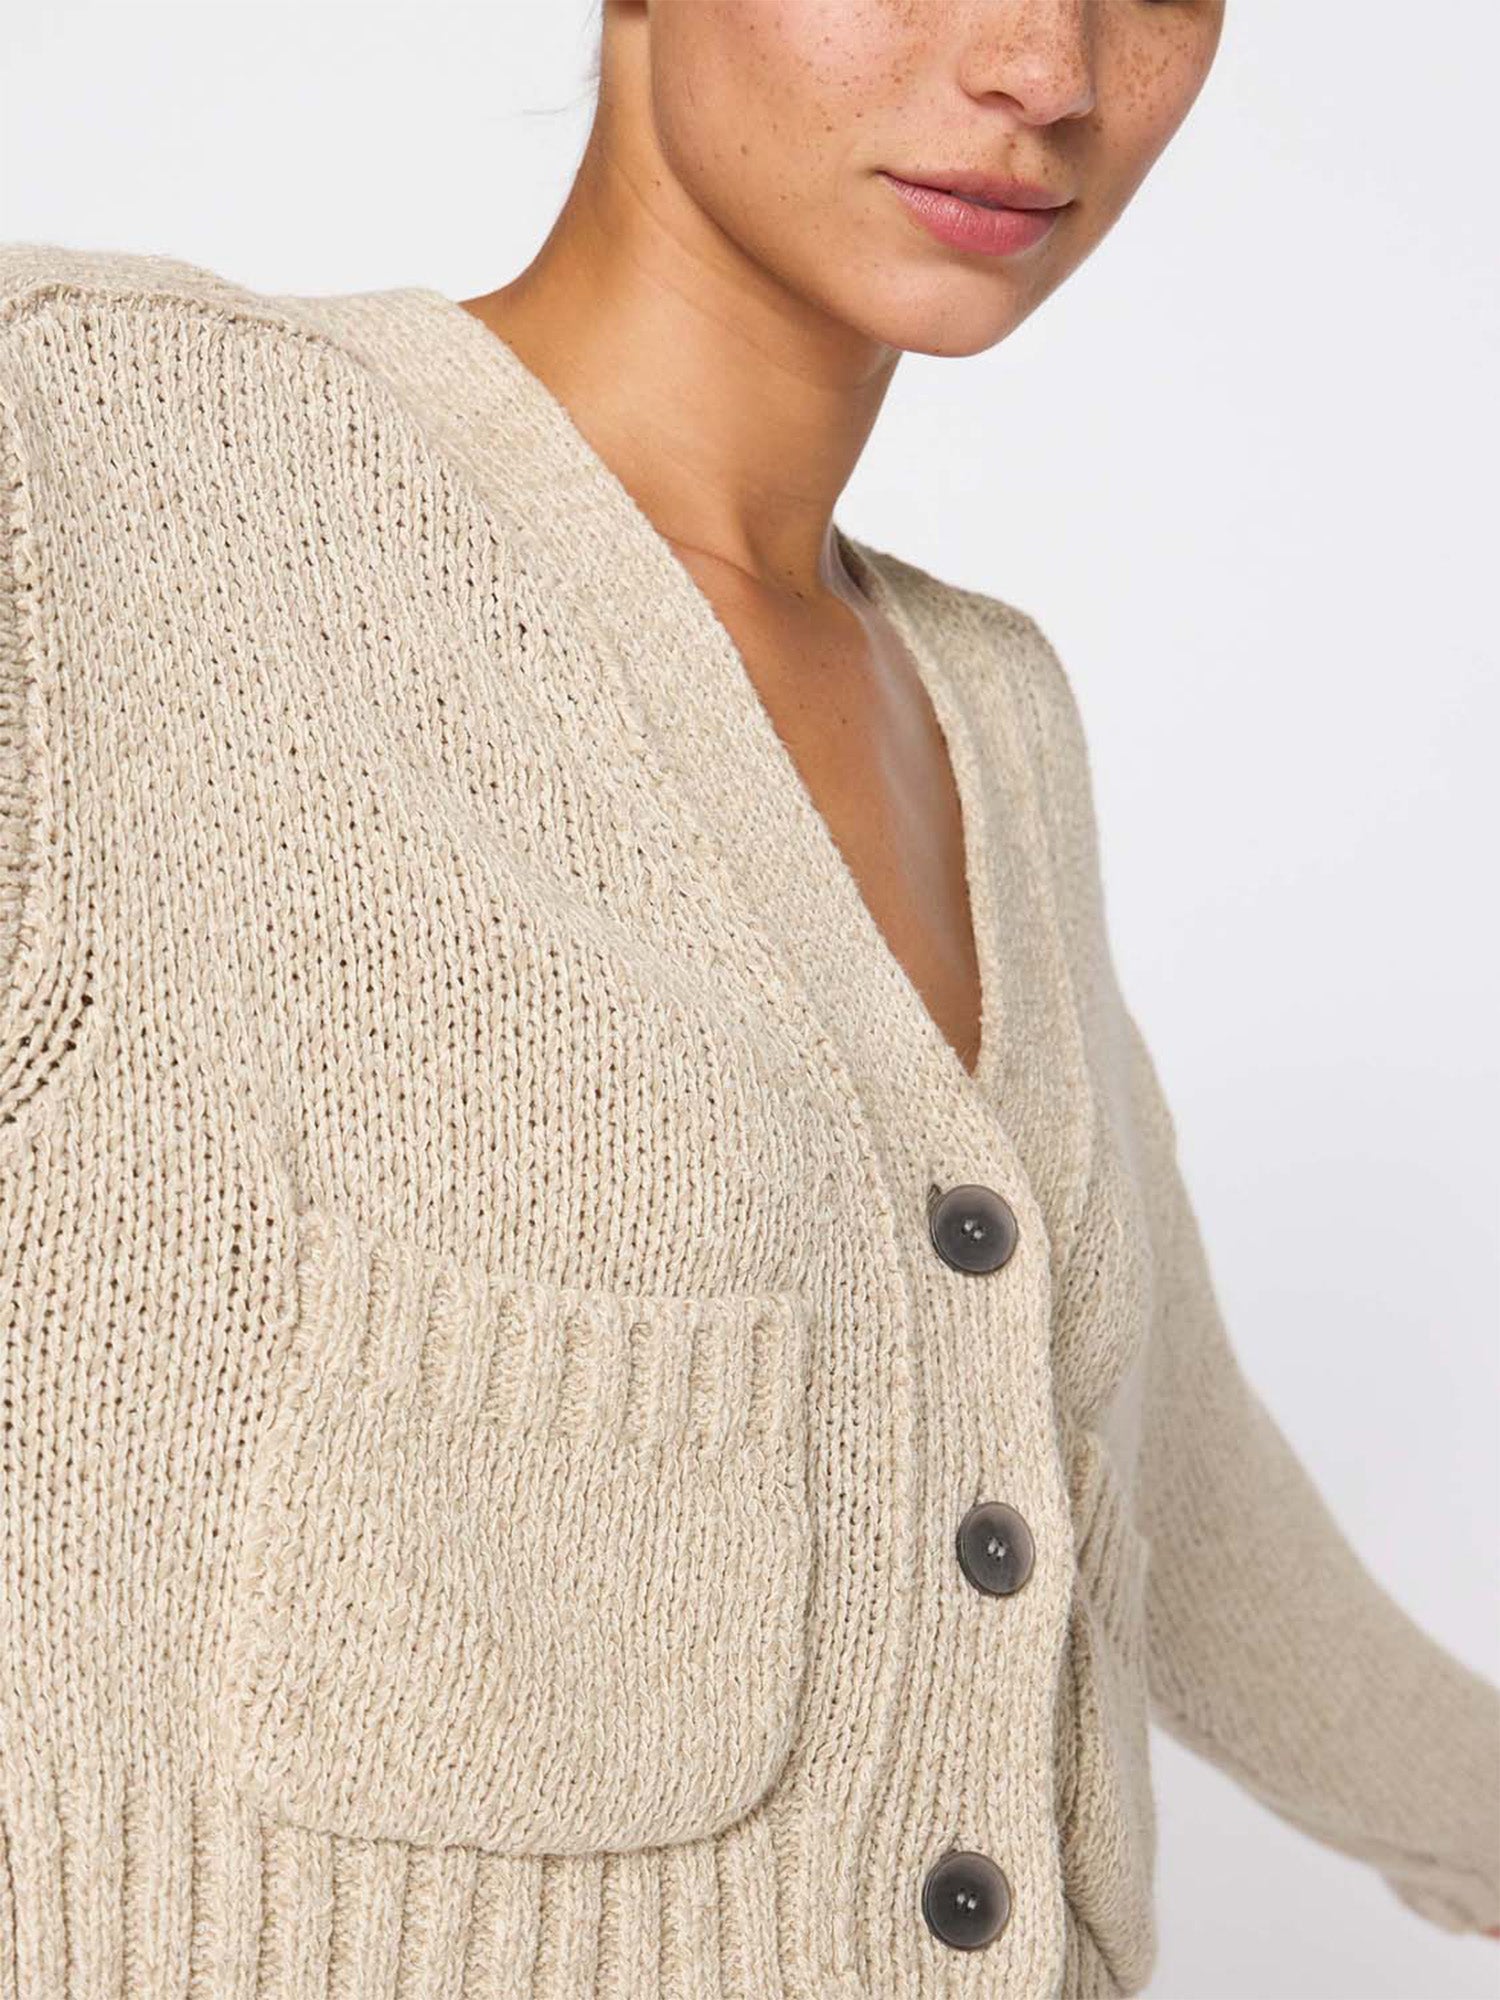 Cropped beige linen cotton cardigan sweater close up